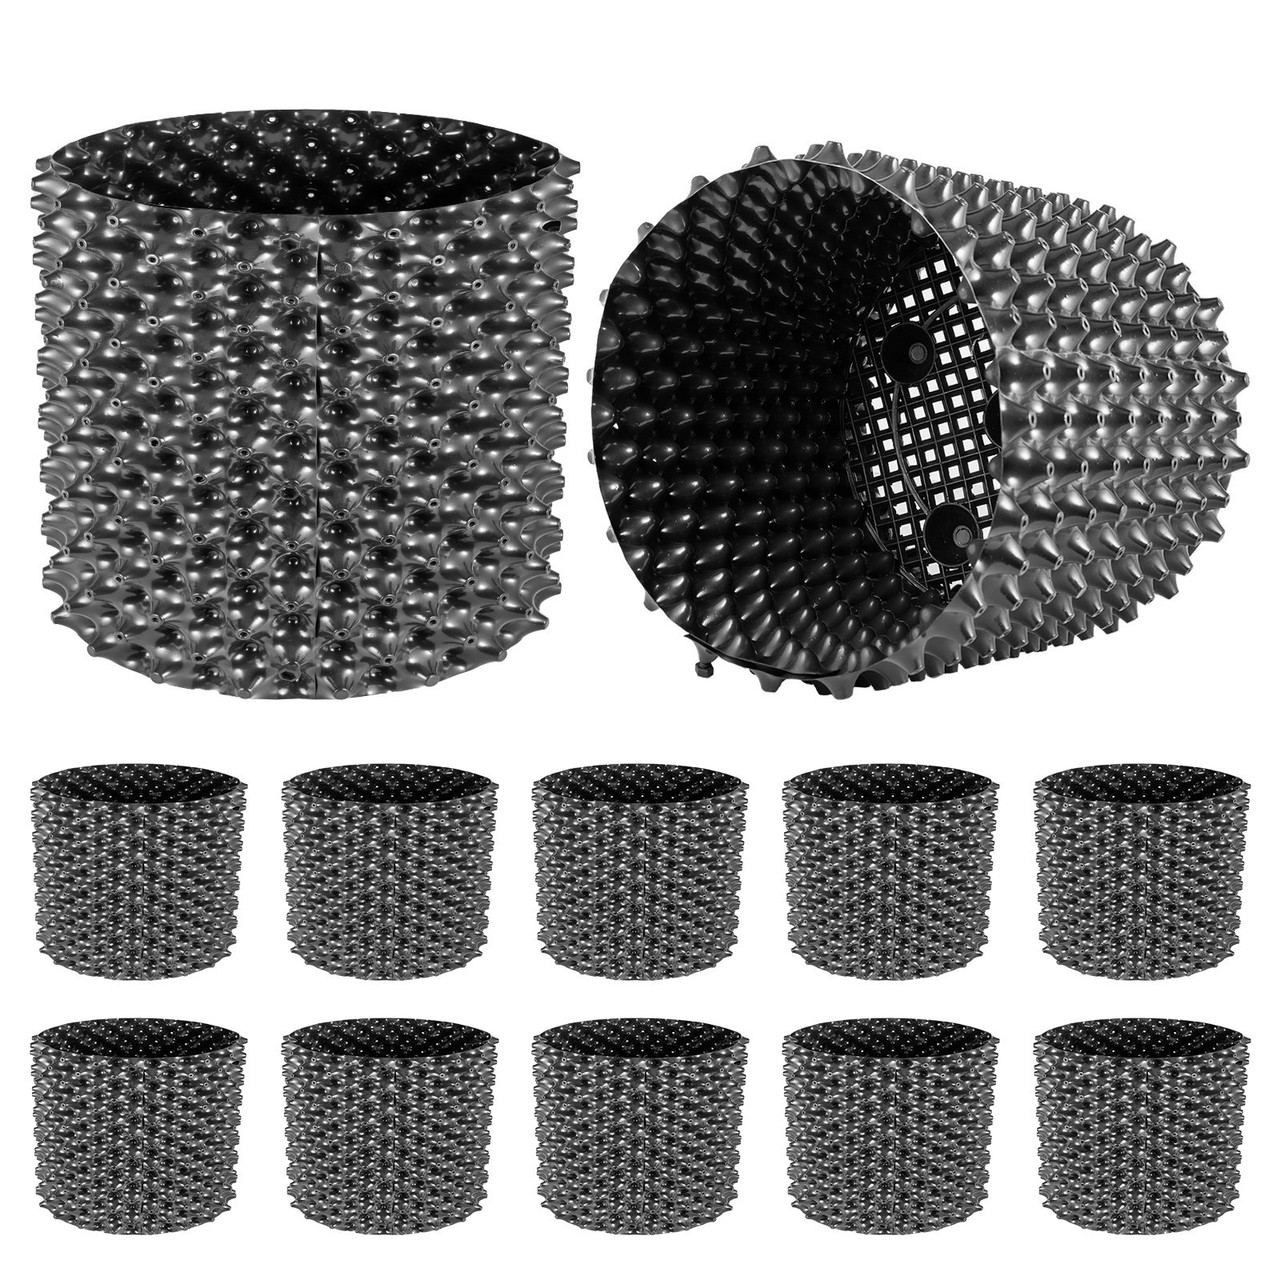 12PCS Air Root Pruning Pots, 5 Gallon Garden Propagation Pot, Black Equivalent Pot, Recycled Air-Pruning Container, Air Root Pots Plant Root Trainer, with Base Screws & Non-Woven Fabric Pot